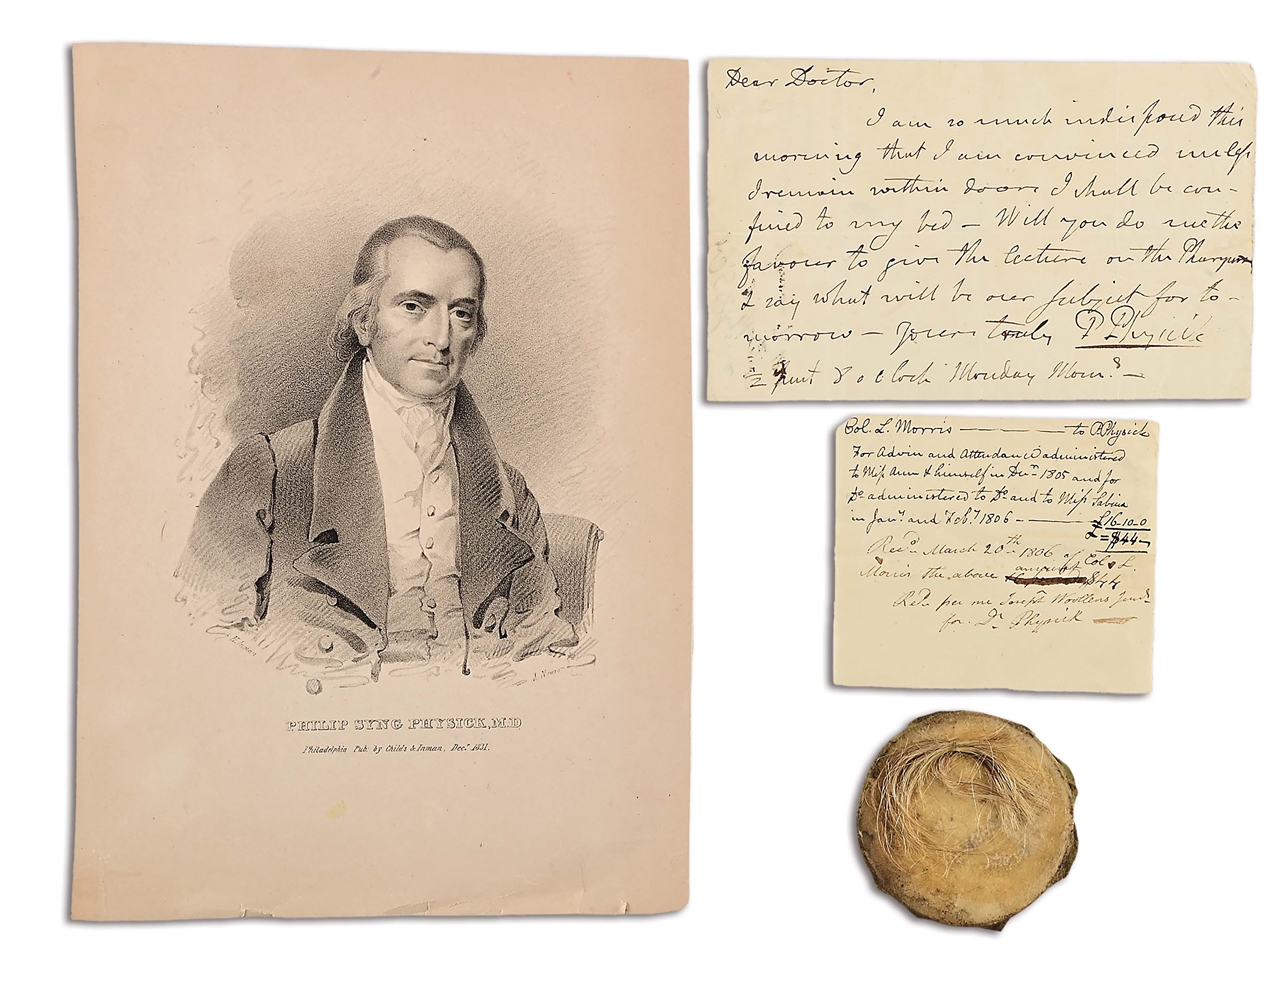 LOT OF 4: PHILLIP SYNG PHYSICK, FATHER OF AMERICAN SURGERY, SIGNATURES, LOCK OF HAIR, ENGRAVING.